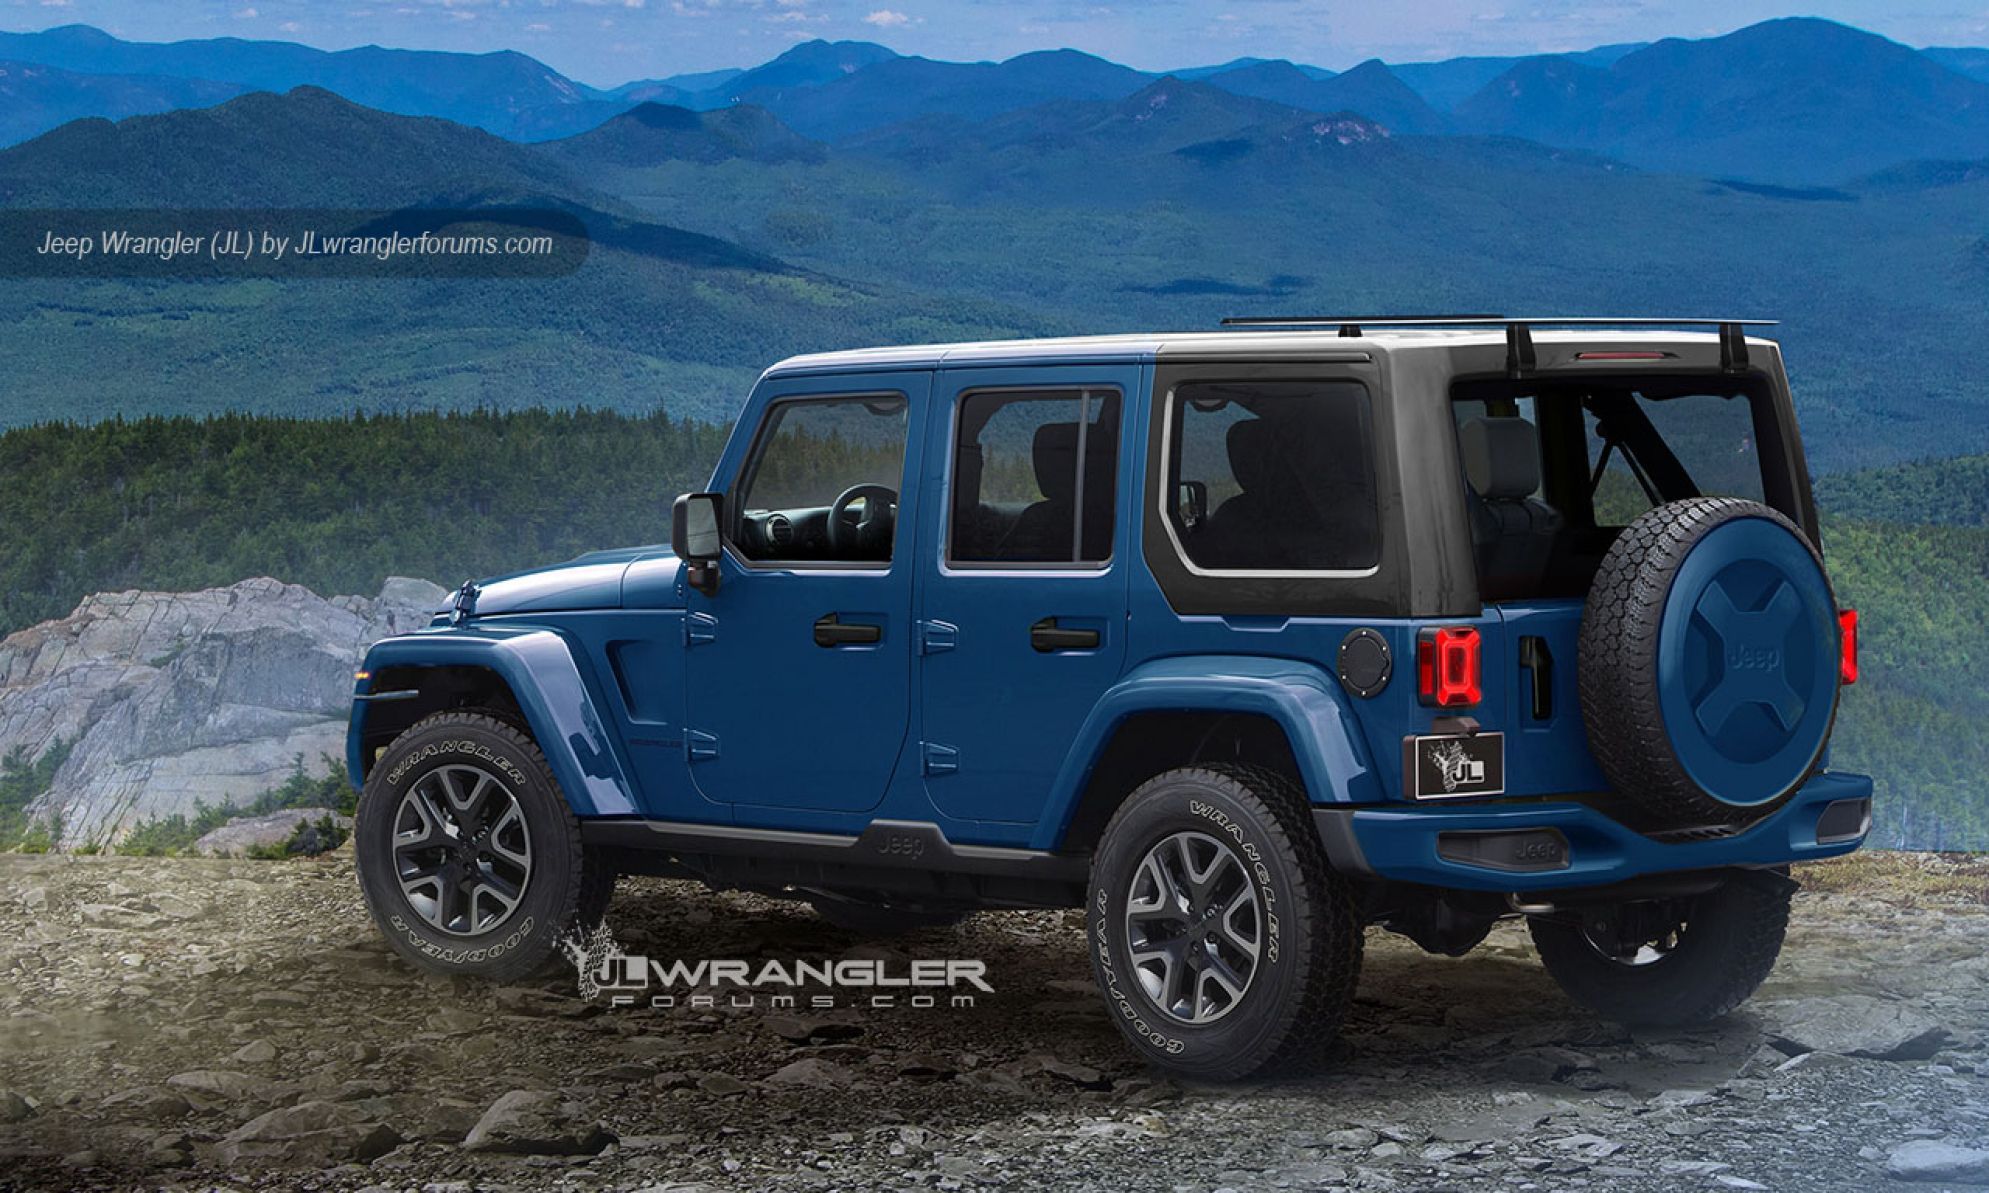 Blue Jeep Wallpapers